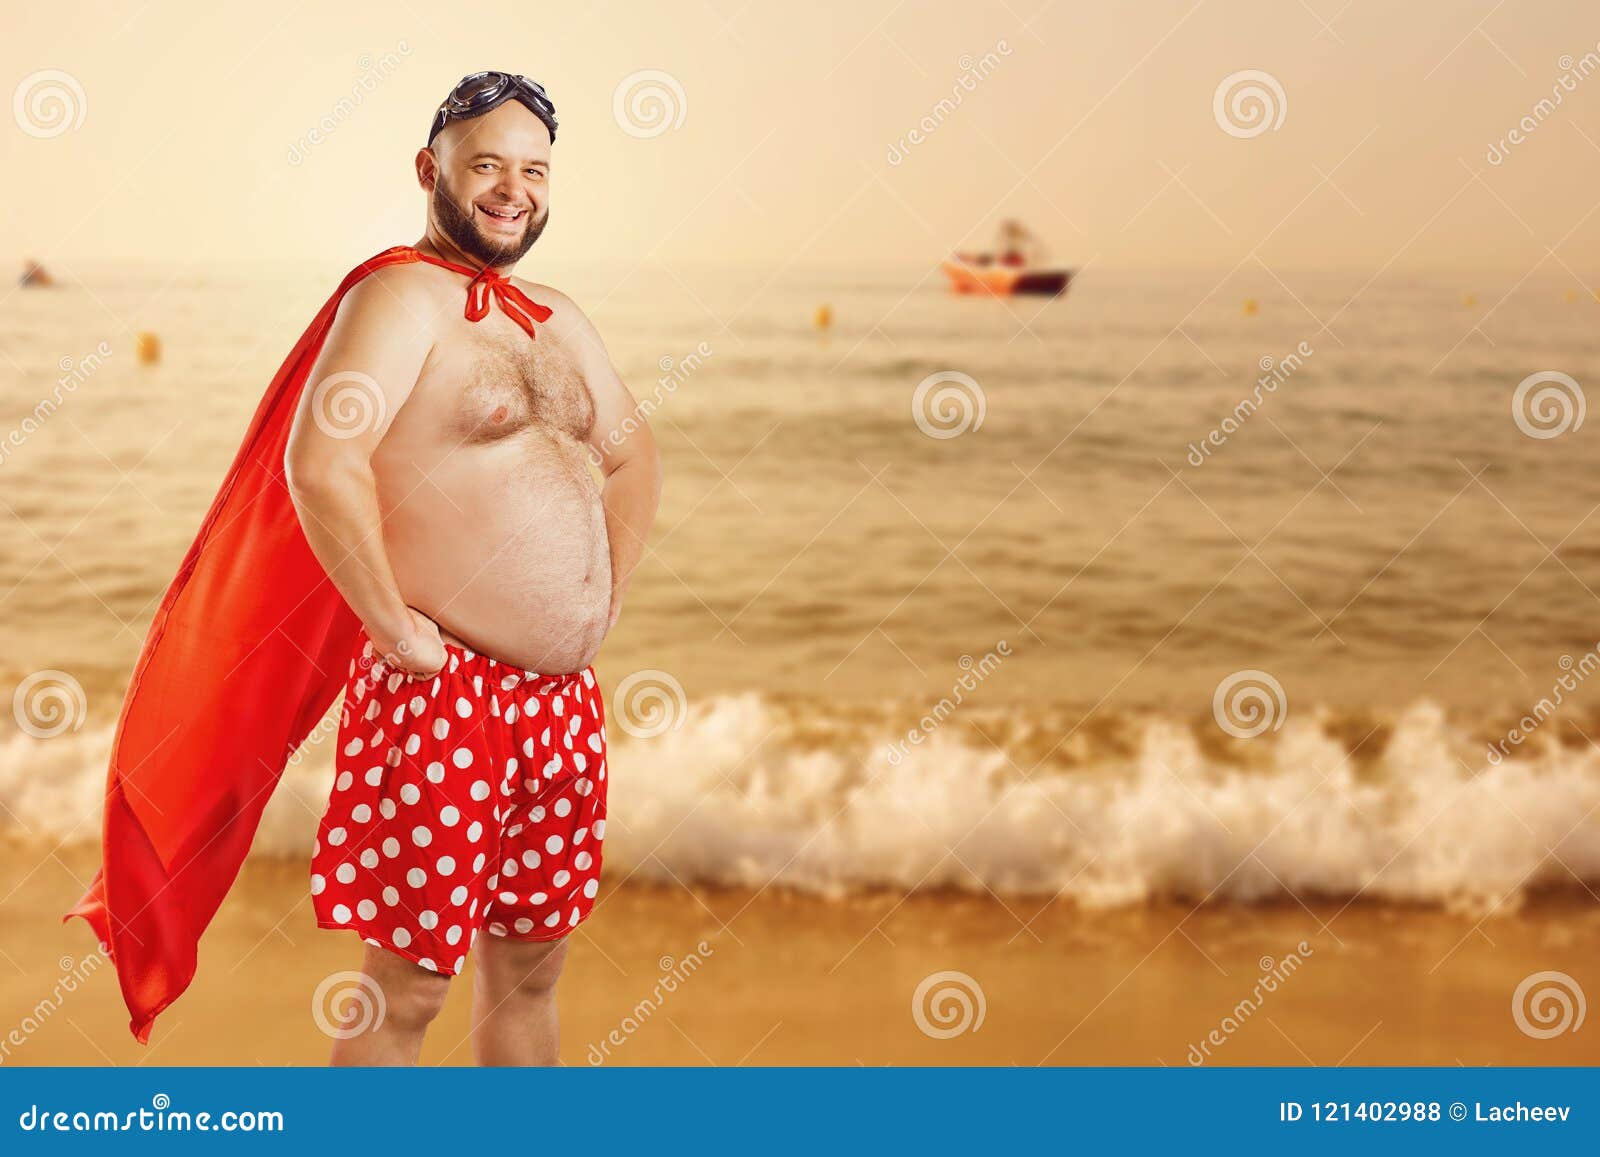 Funny Fat Man in a Superhero Costume on the Beach in the Summer ...